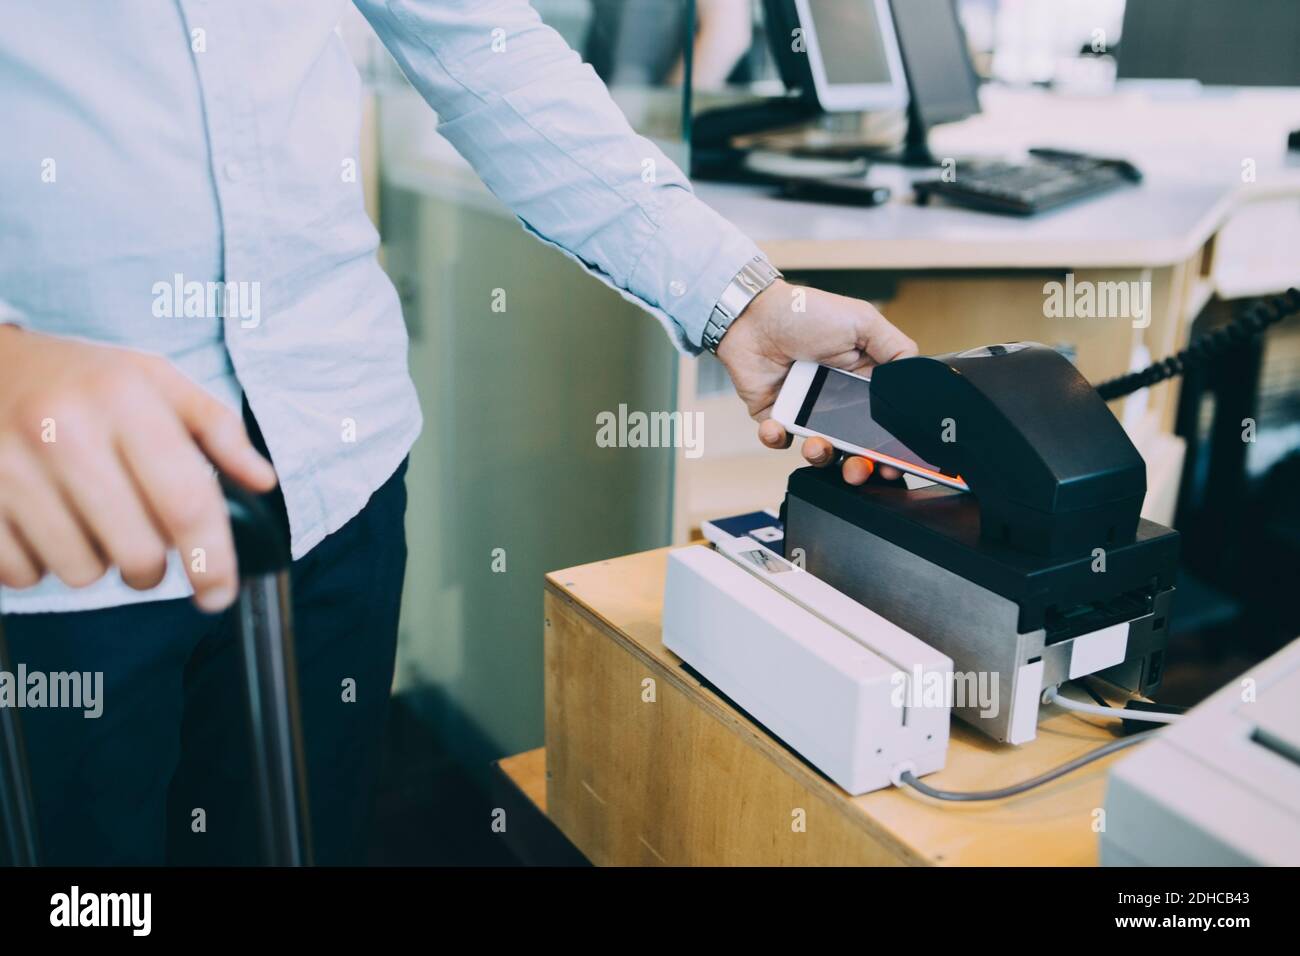 Midsection of businessman scanning ticket on smart phone at airport check-in counter Stock Photo